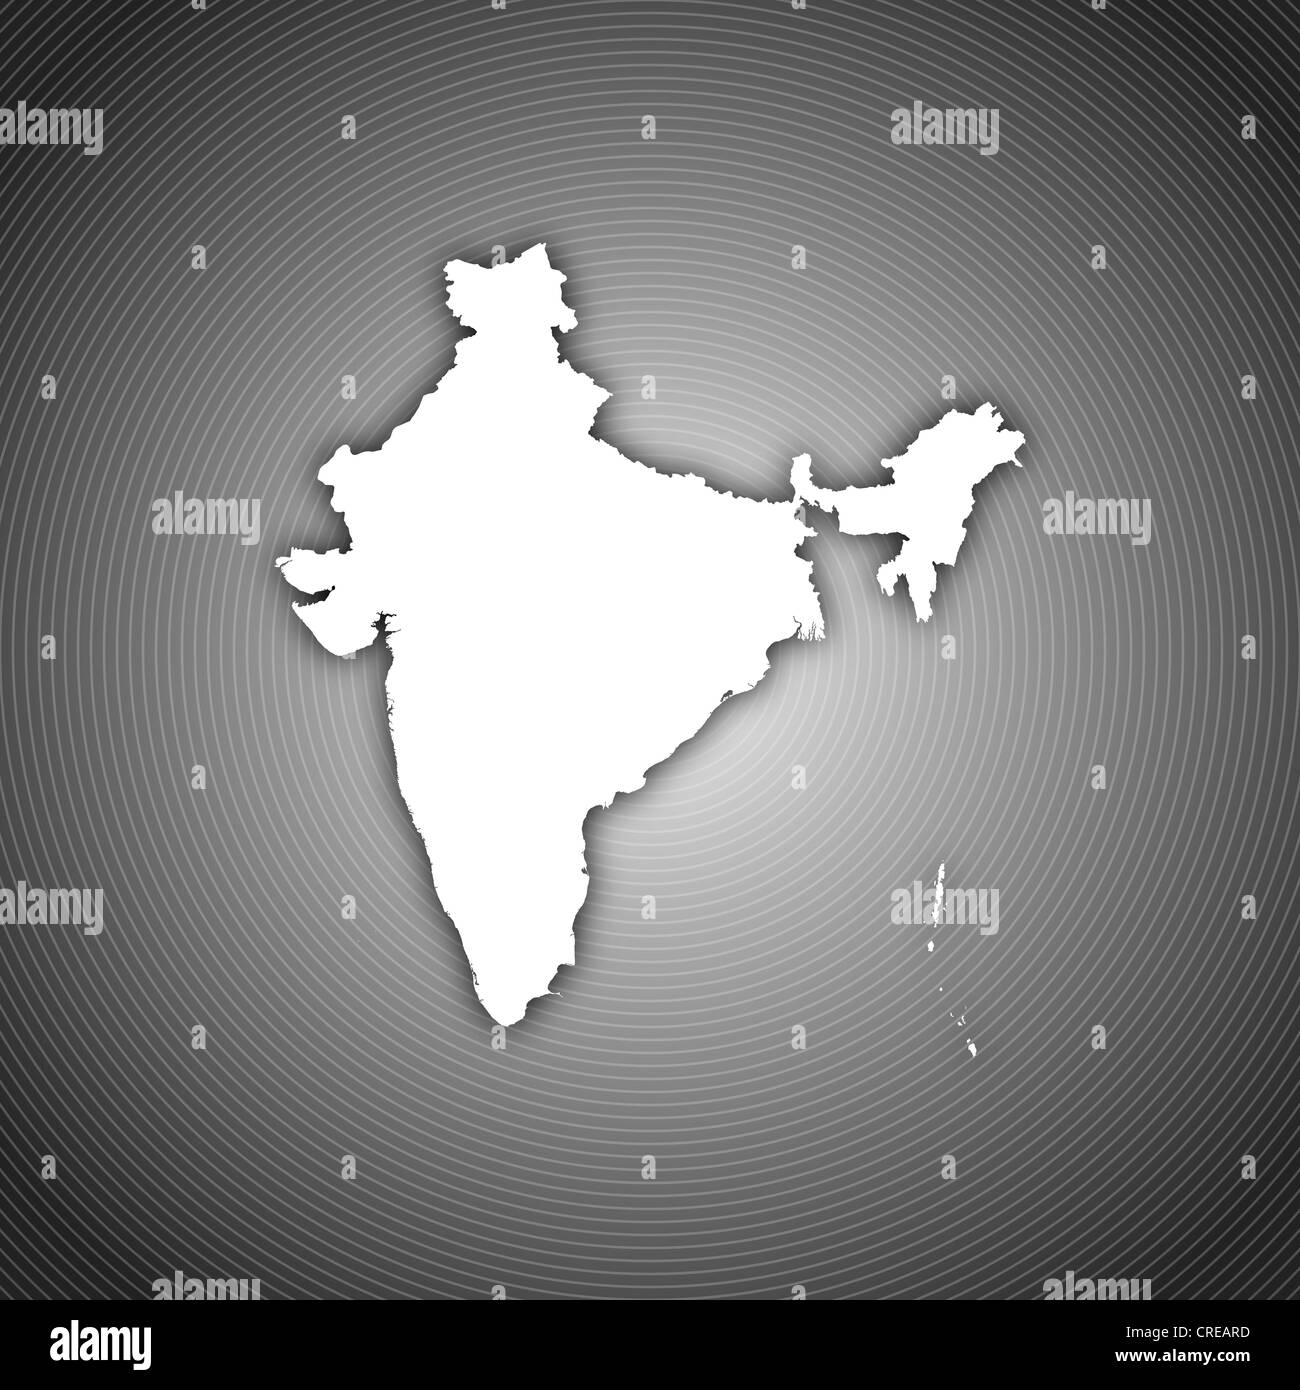 Political map of India with the several states. Stock Photo